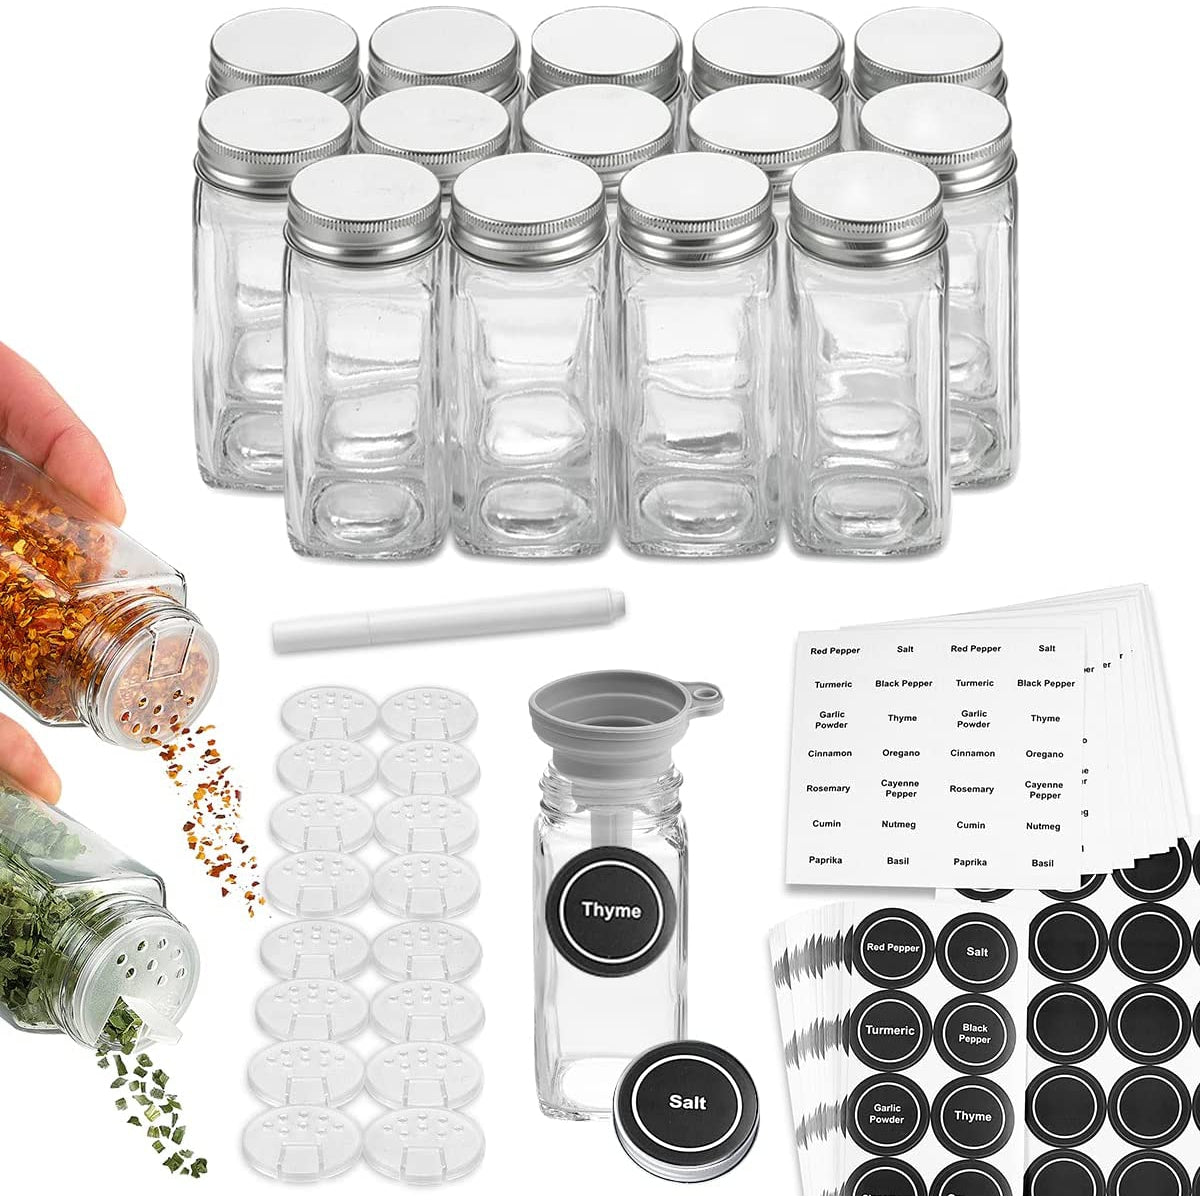 Paris Hilton Glass Spice Jar Storage Set, 4-Ounce Empty Spice Jars with Labels, Shaker Caps and Metal Lids, Collapsible Funnel Included, 25-Piece